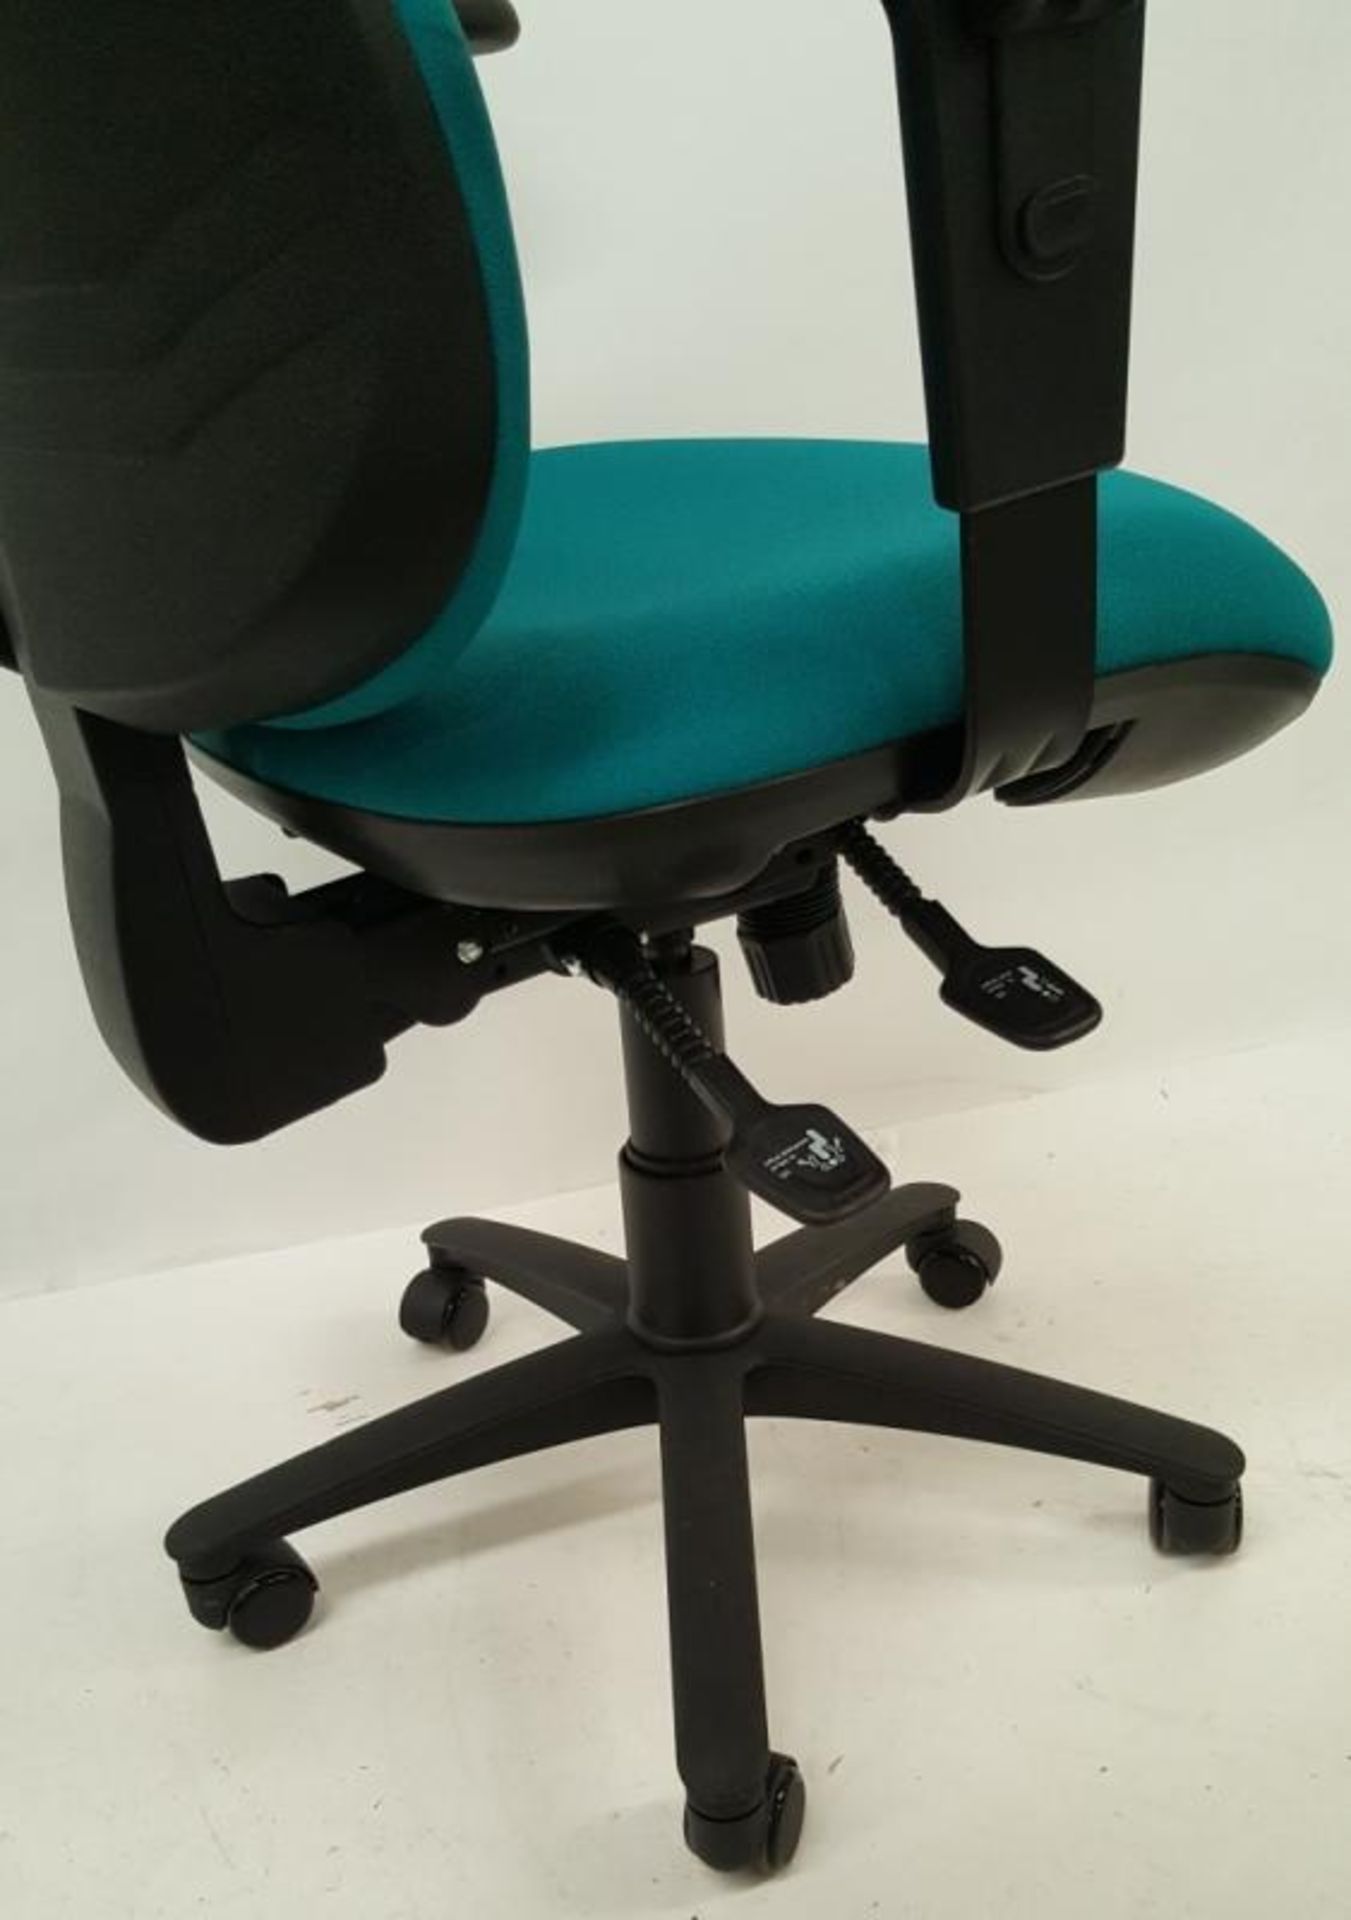 4 x OCEE Design ‘TICK’ Premium High Back Office Chairs In Turquoise With Adjustable Height And Synch - Bild 3 aus 9